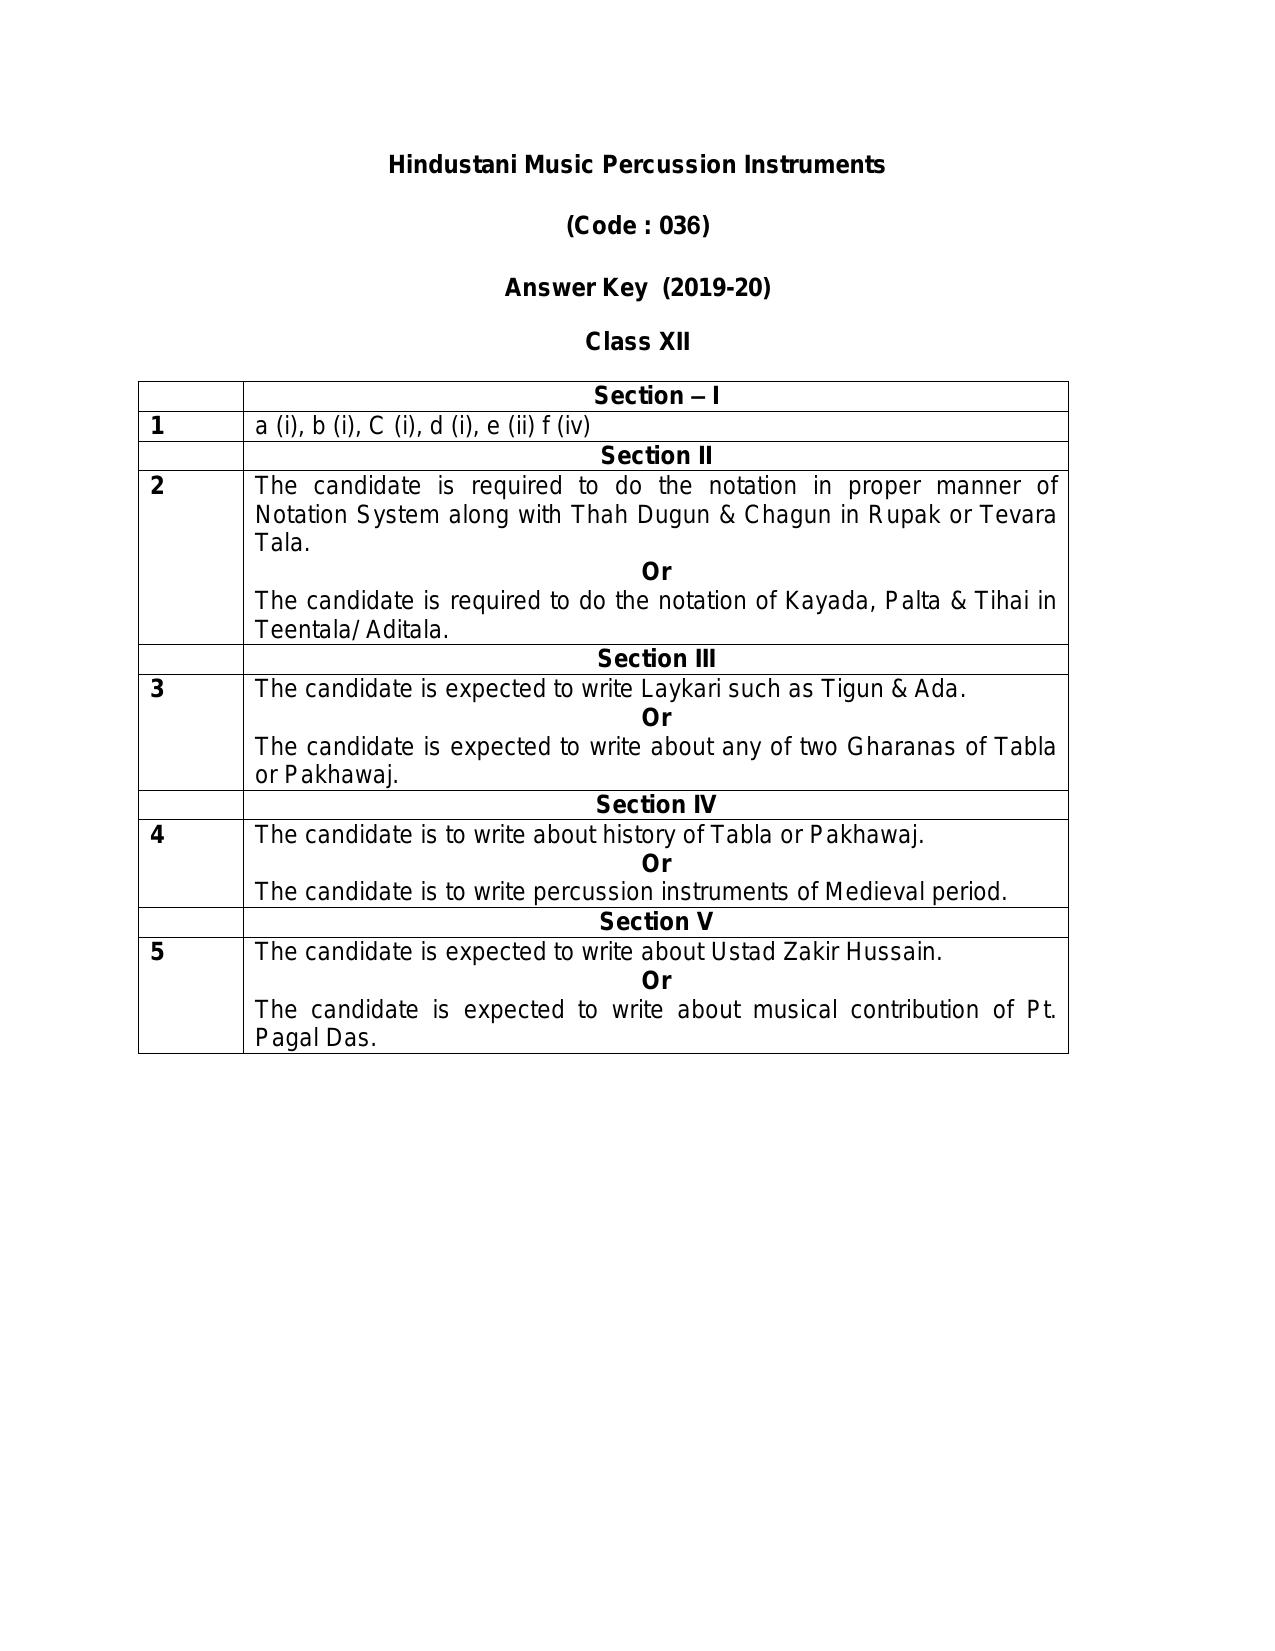 CBSE Class 12 Hindustani Music (Percussion) -Sample Paper 2019-20 - Page 1